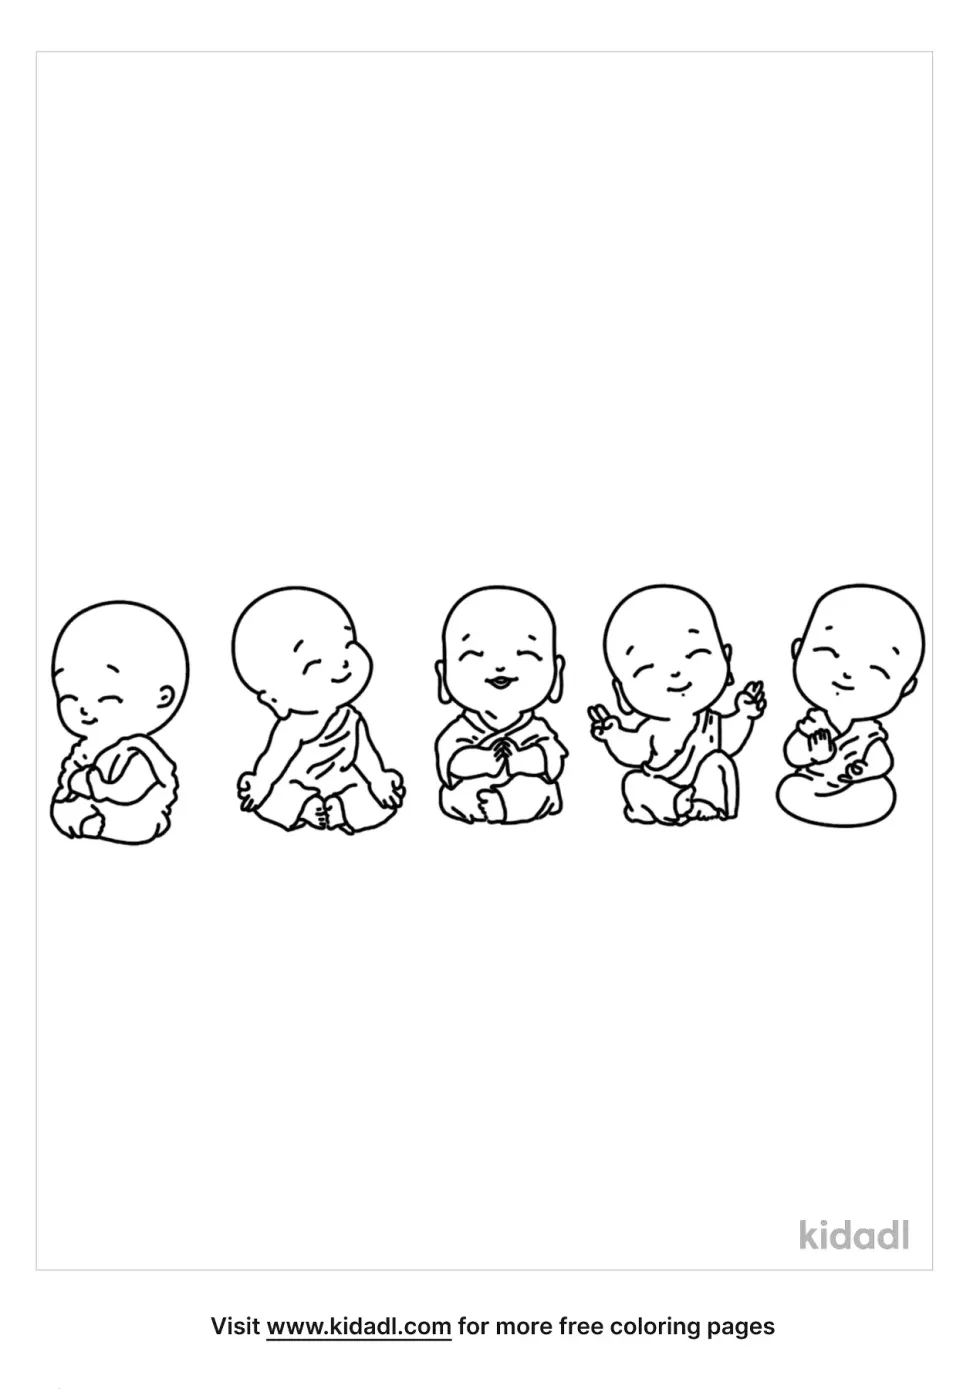 5 Buddhas Coloring Page